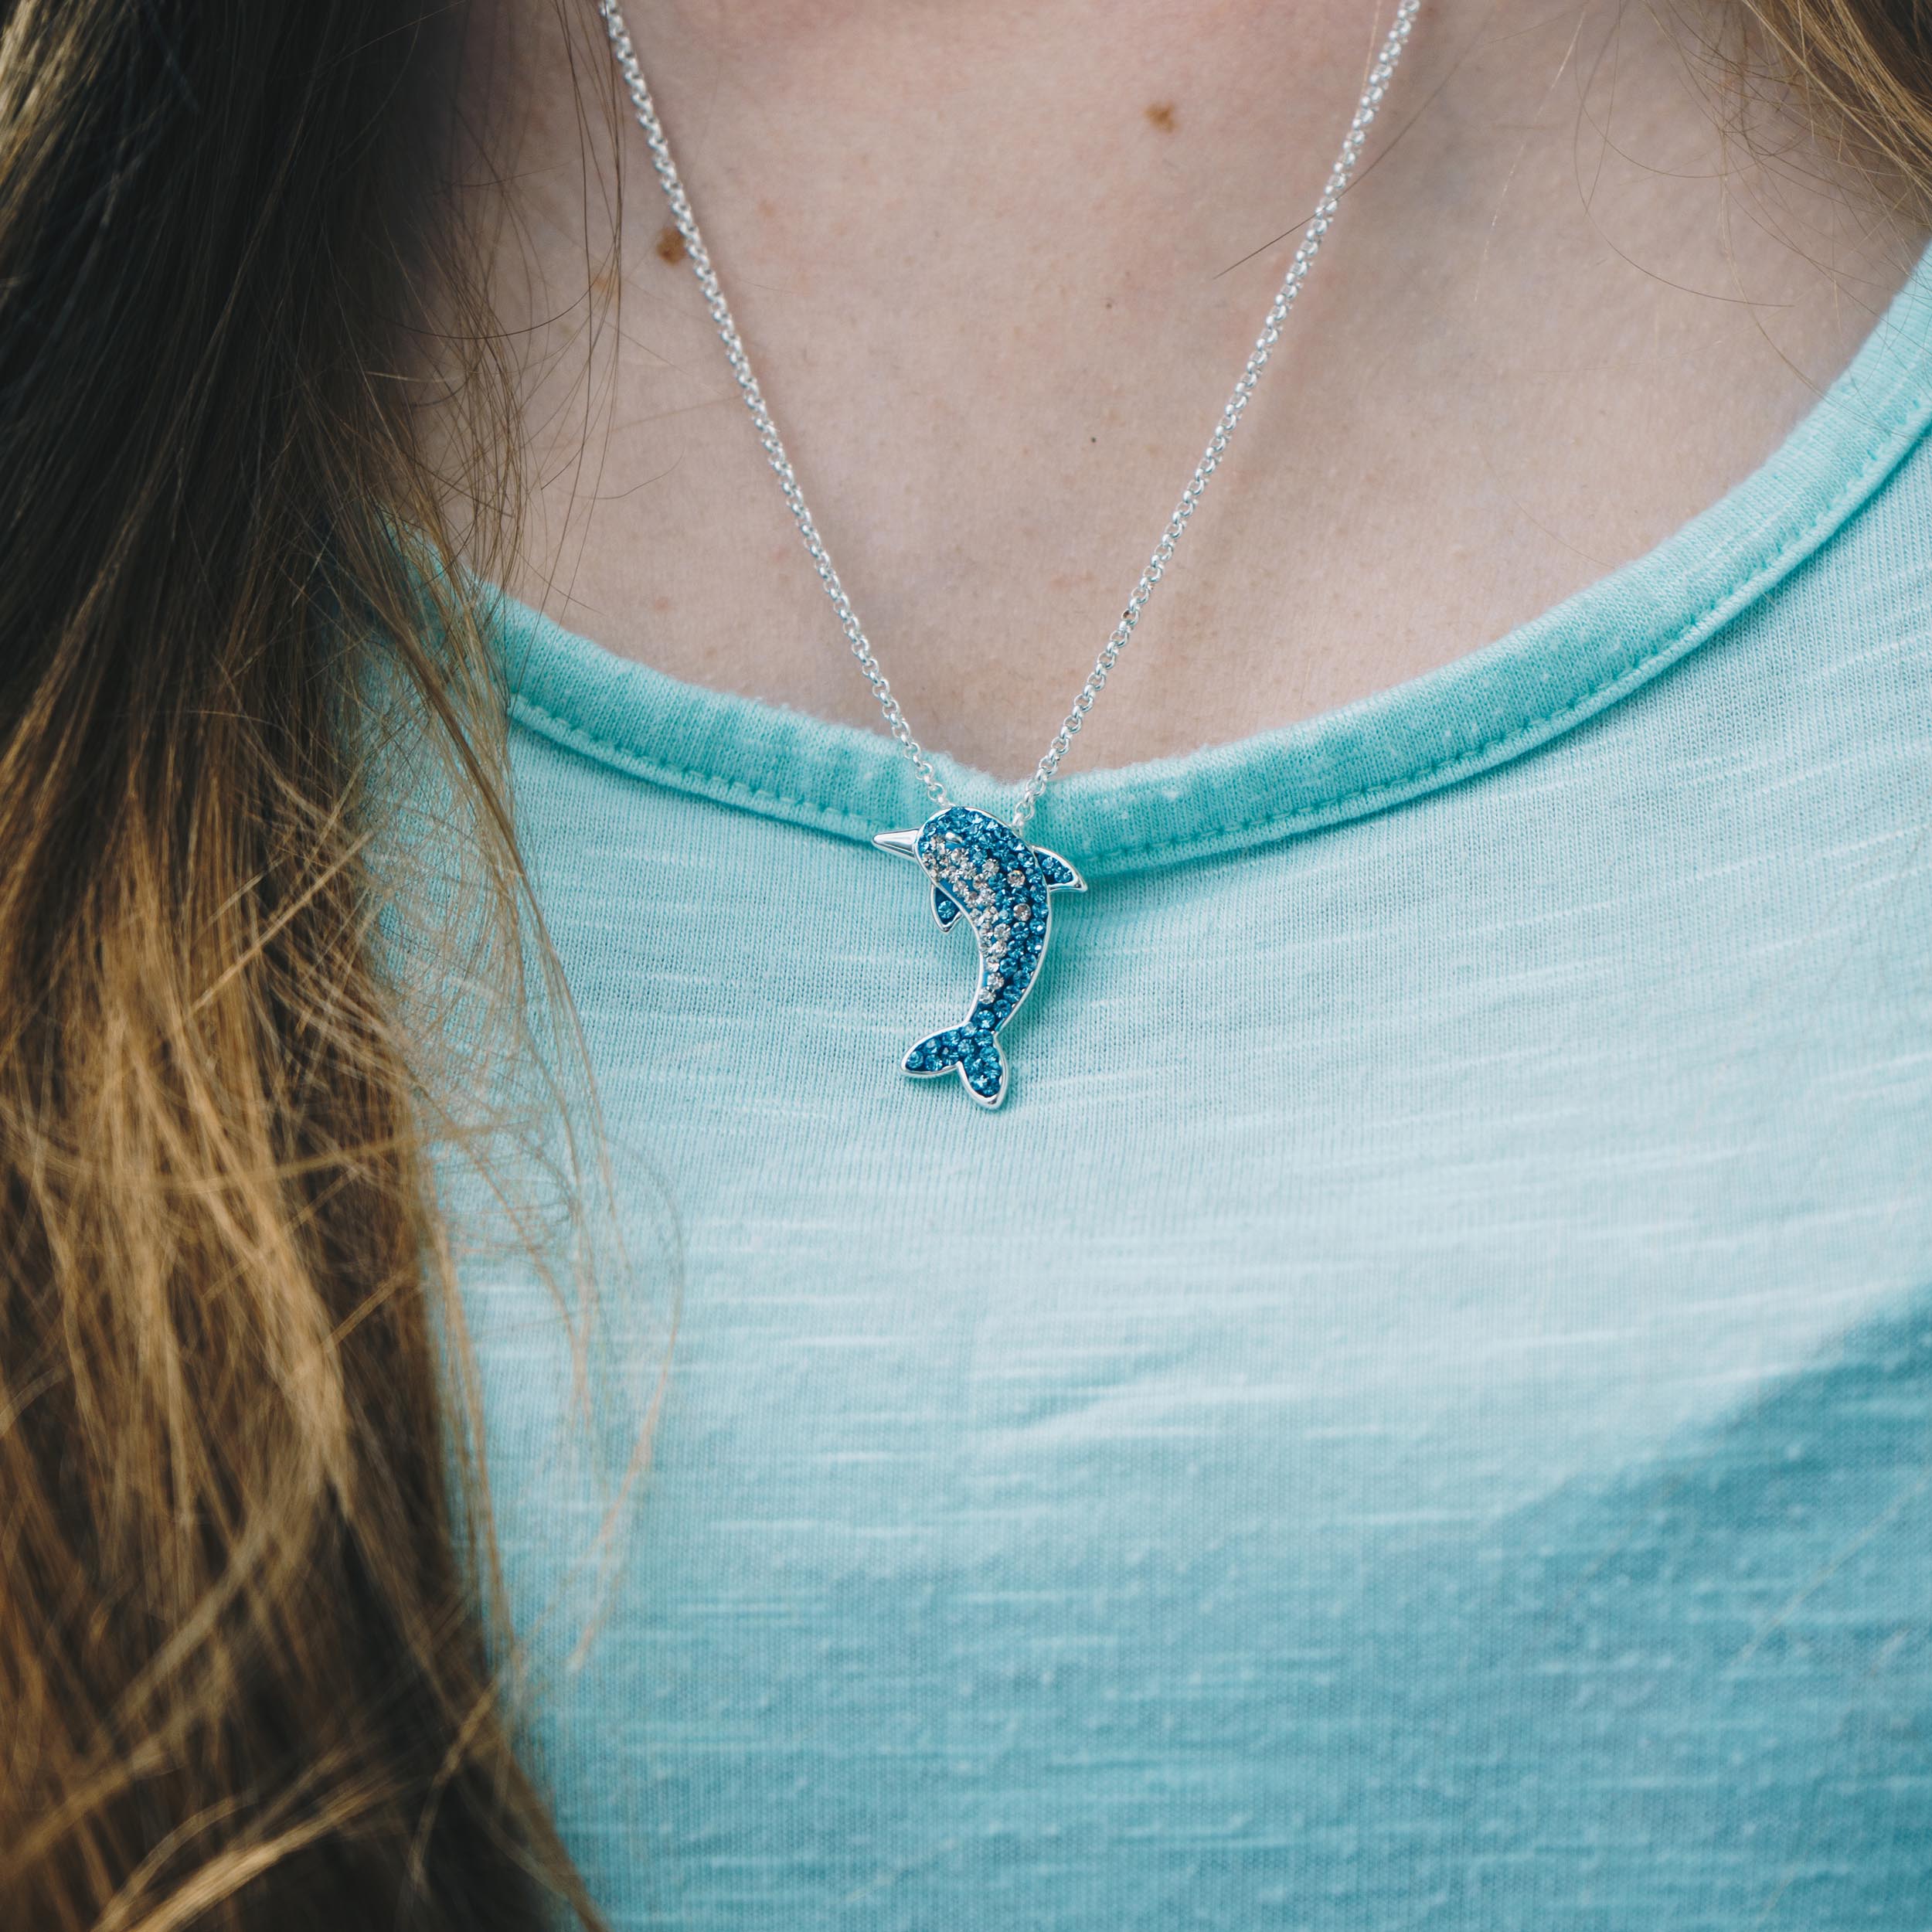 Crystal Dolphin Necklace